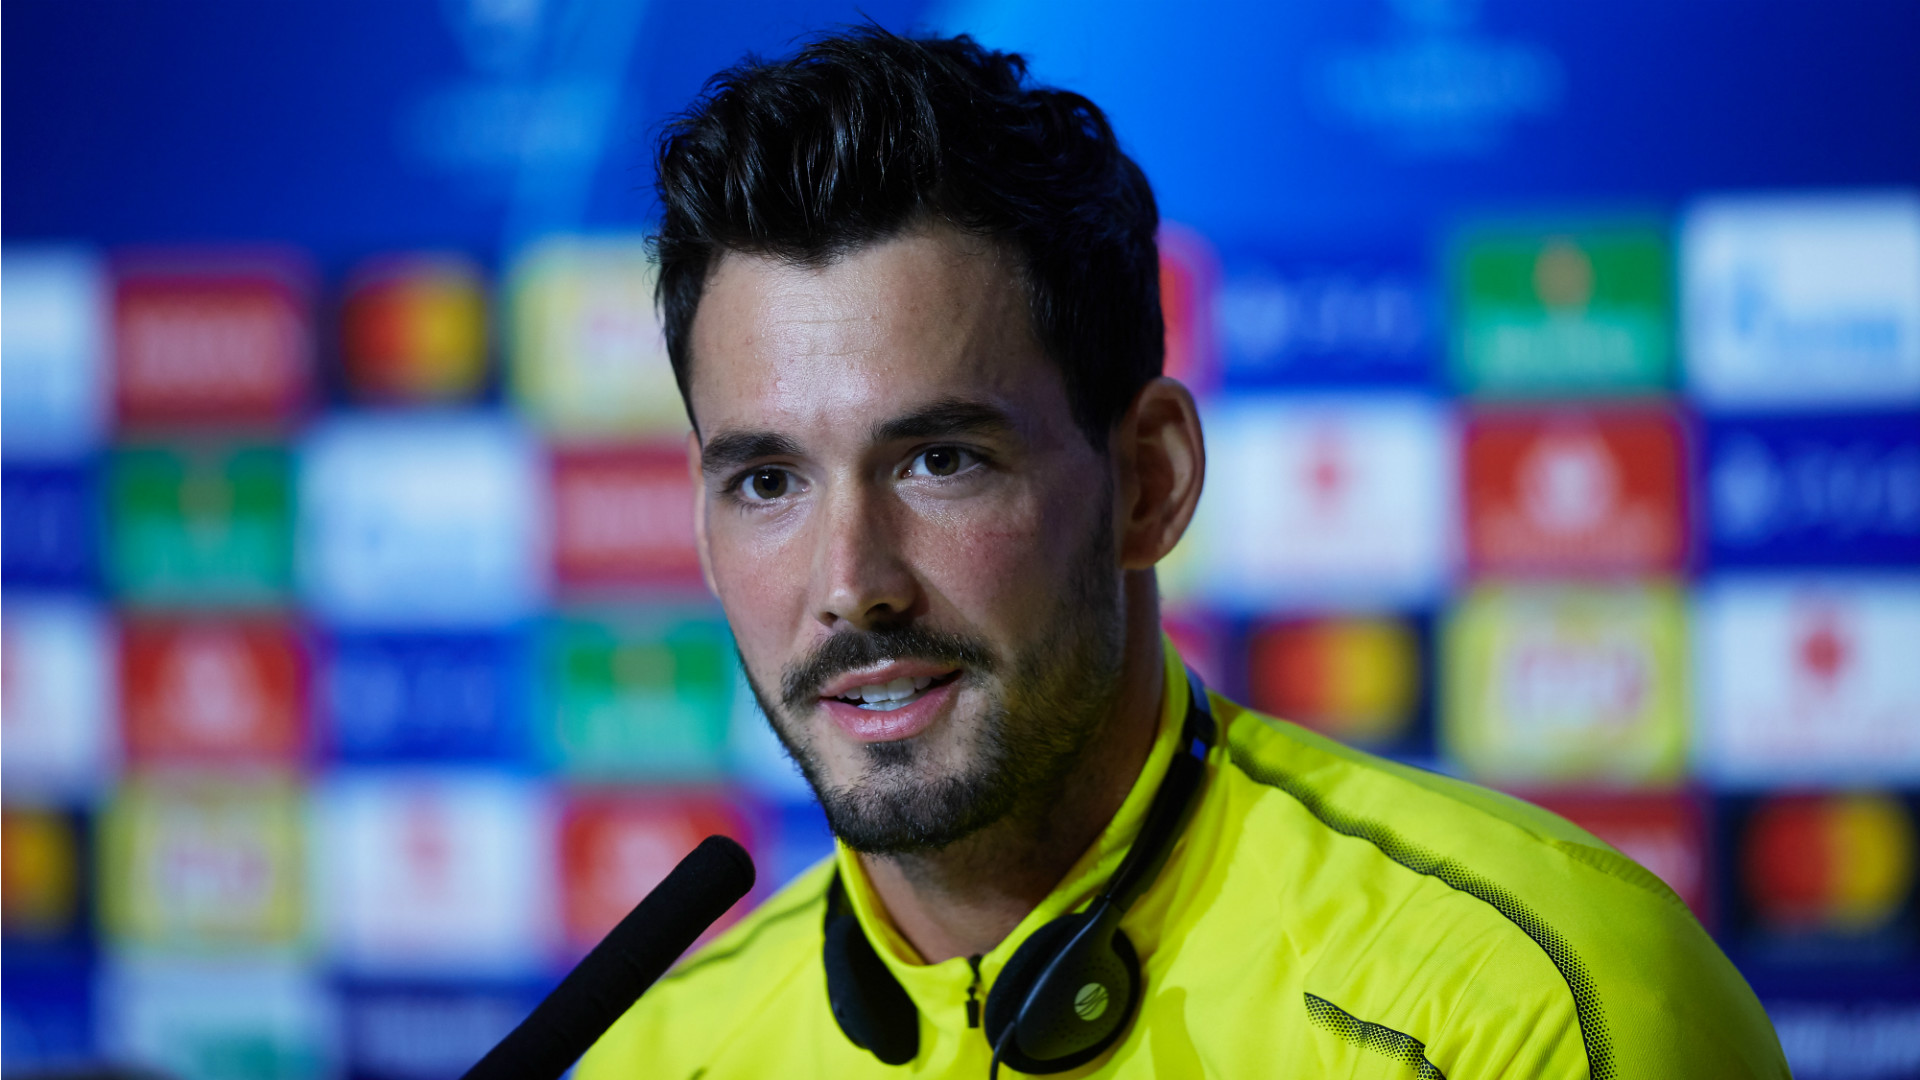 Chelsea set to miss out on Burki as goalkeeper teases new Borussia Dortmund contract